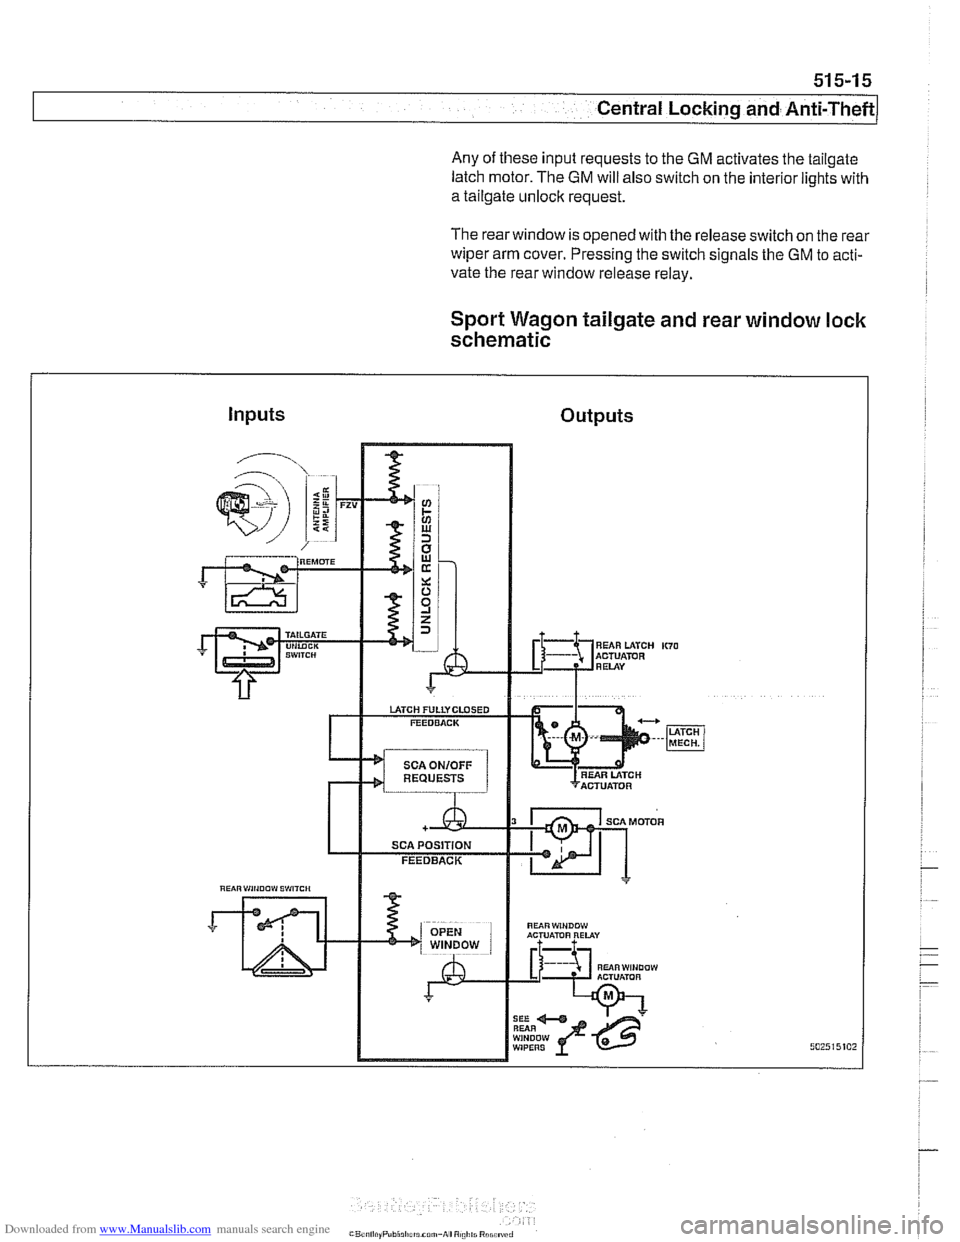 BMW 528i 2000 E39 Workshop Manual Downloaded from www.Manualslib.com manuals search engine 
51 5-1 5 
Central Locking and Anti-Theft 
Any  of these input requests to  the GM activates  the tailgate 
latch motor.  The 
GM will also swi